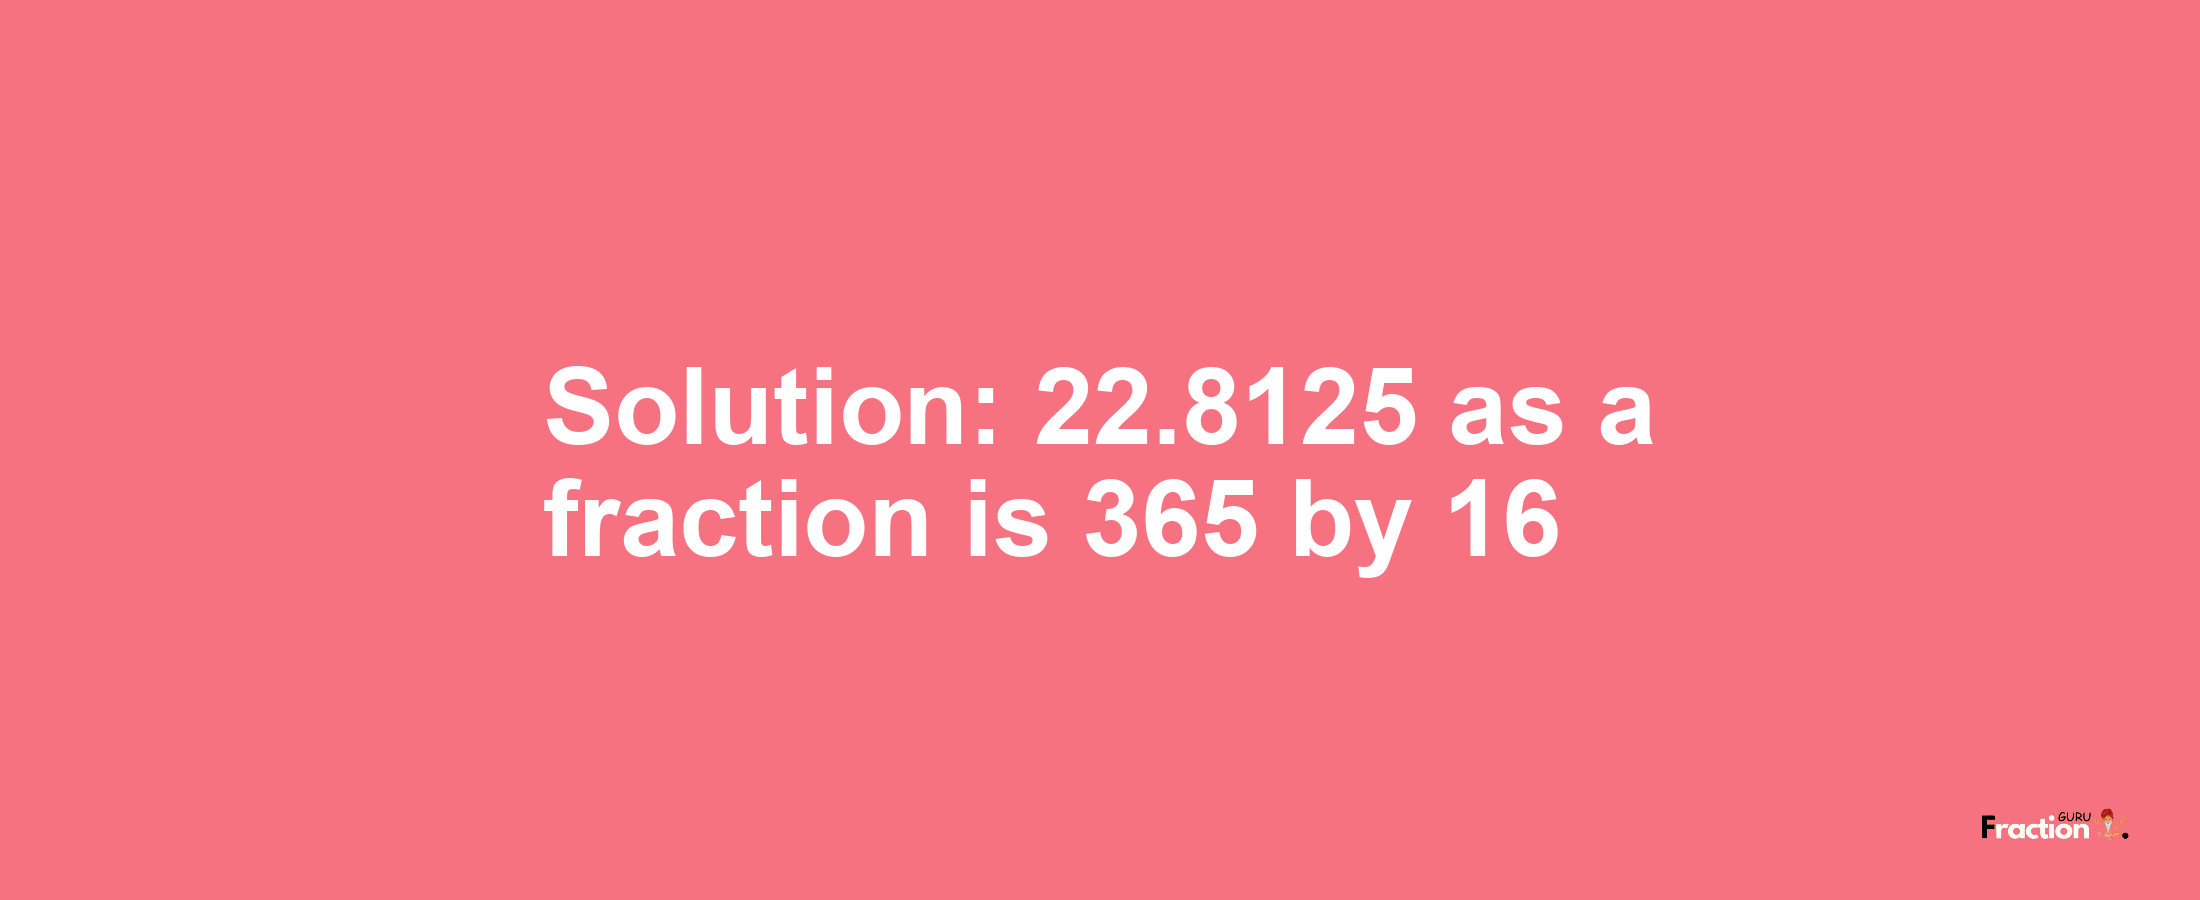 Solution:22.8125 as a fraction is 365/16